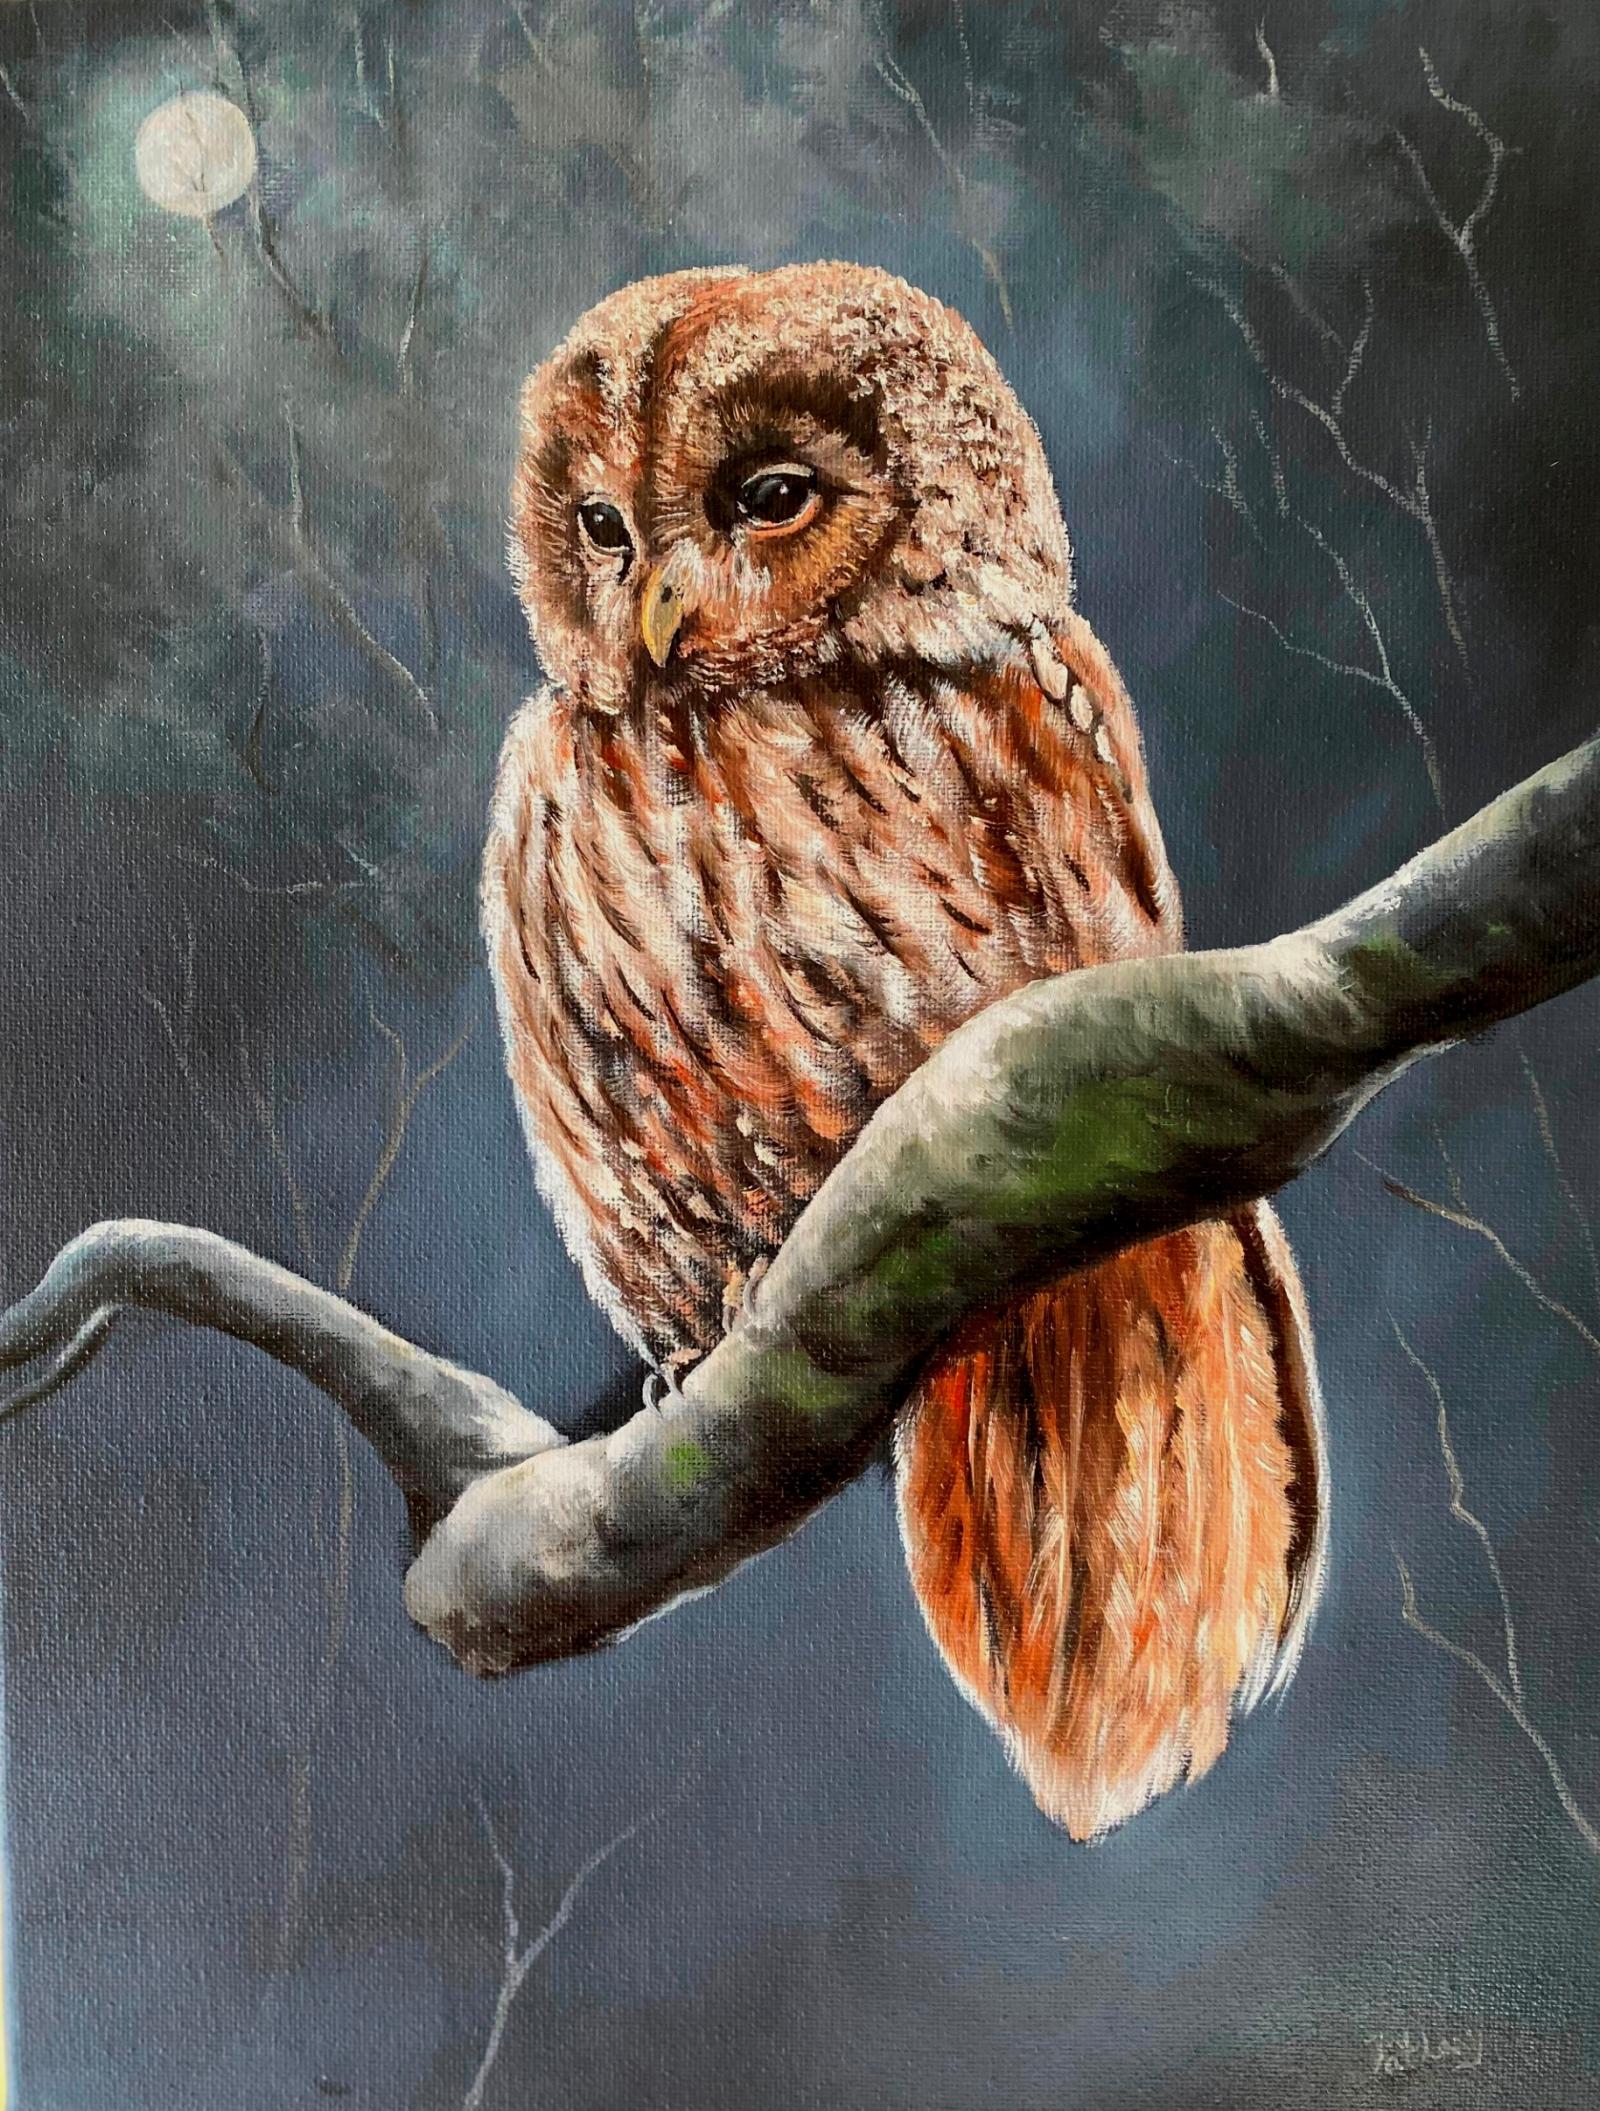 Oil painting of a barred owl on a tree branch at night